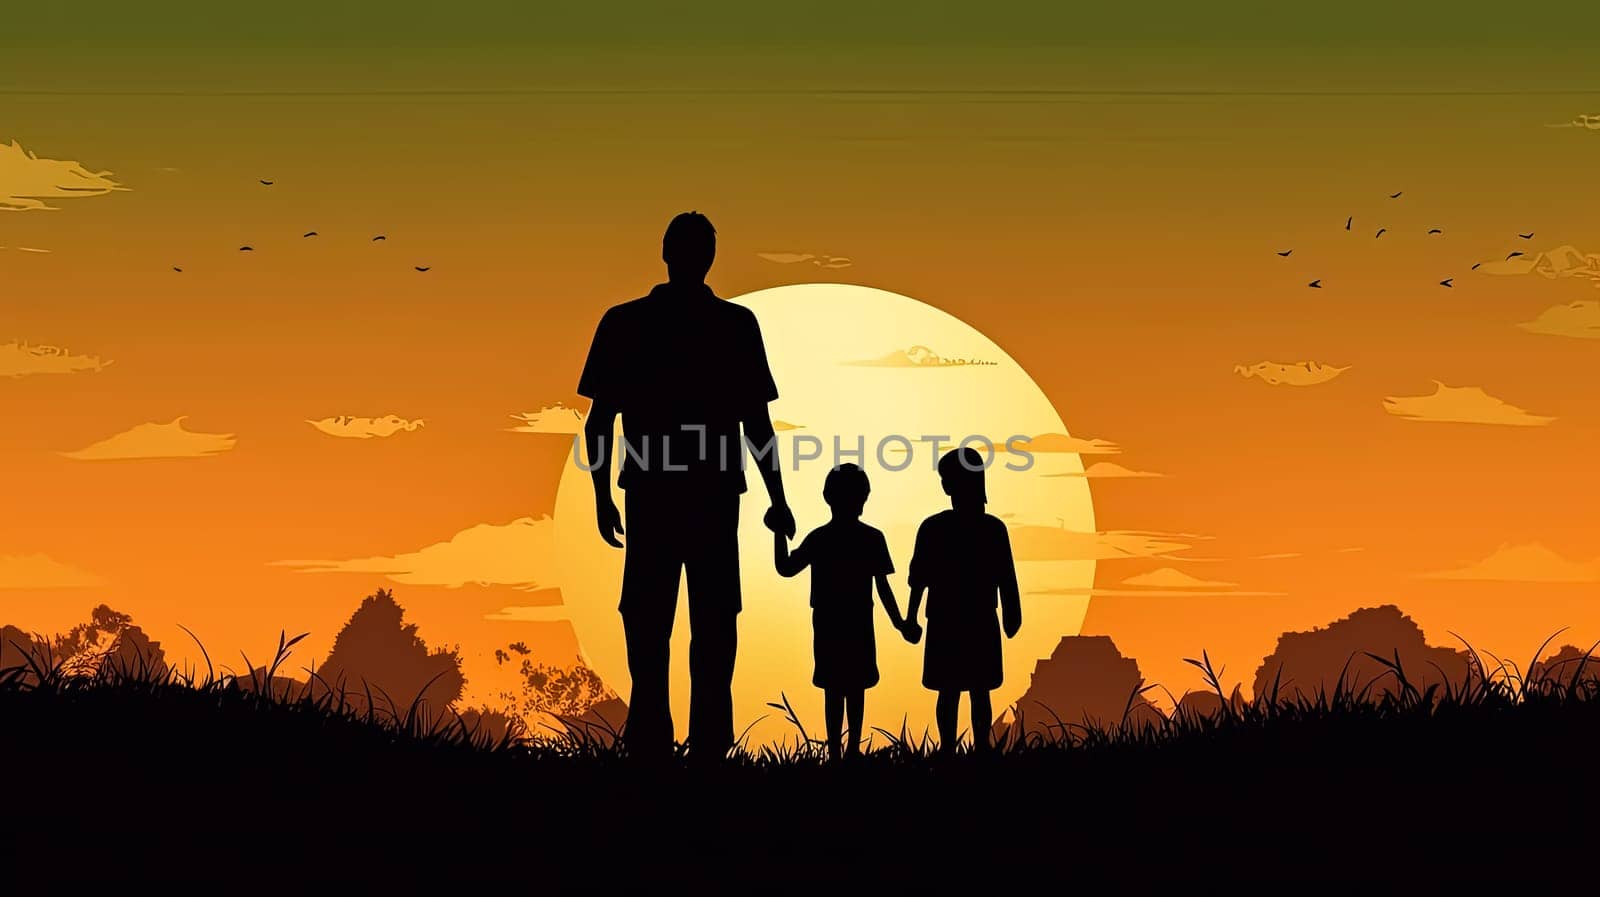 Capture the beauty of family love with an illustration of a father, children, and wife against a sunset backdrop. A heartwarming Fathers Day concept filled with warmth and togetherness.